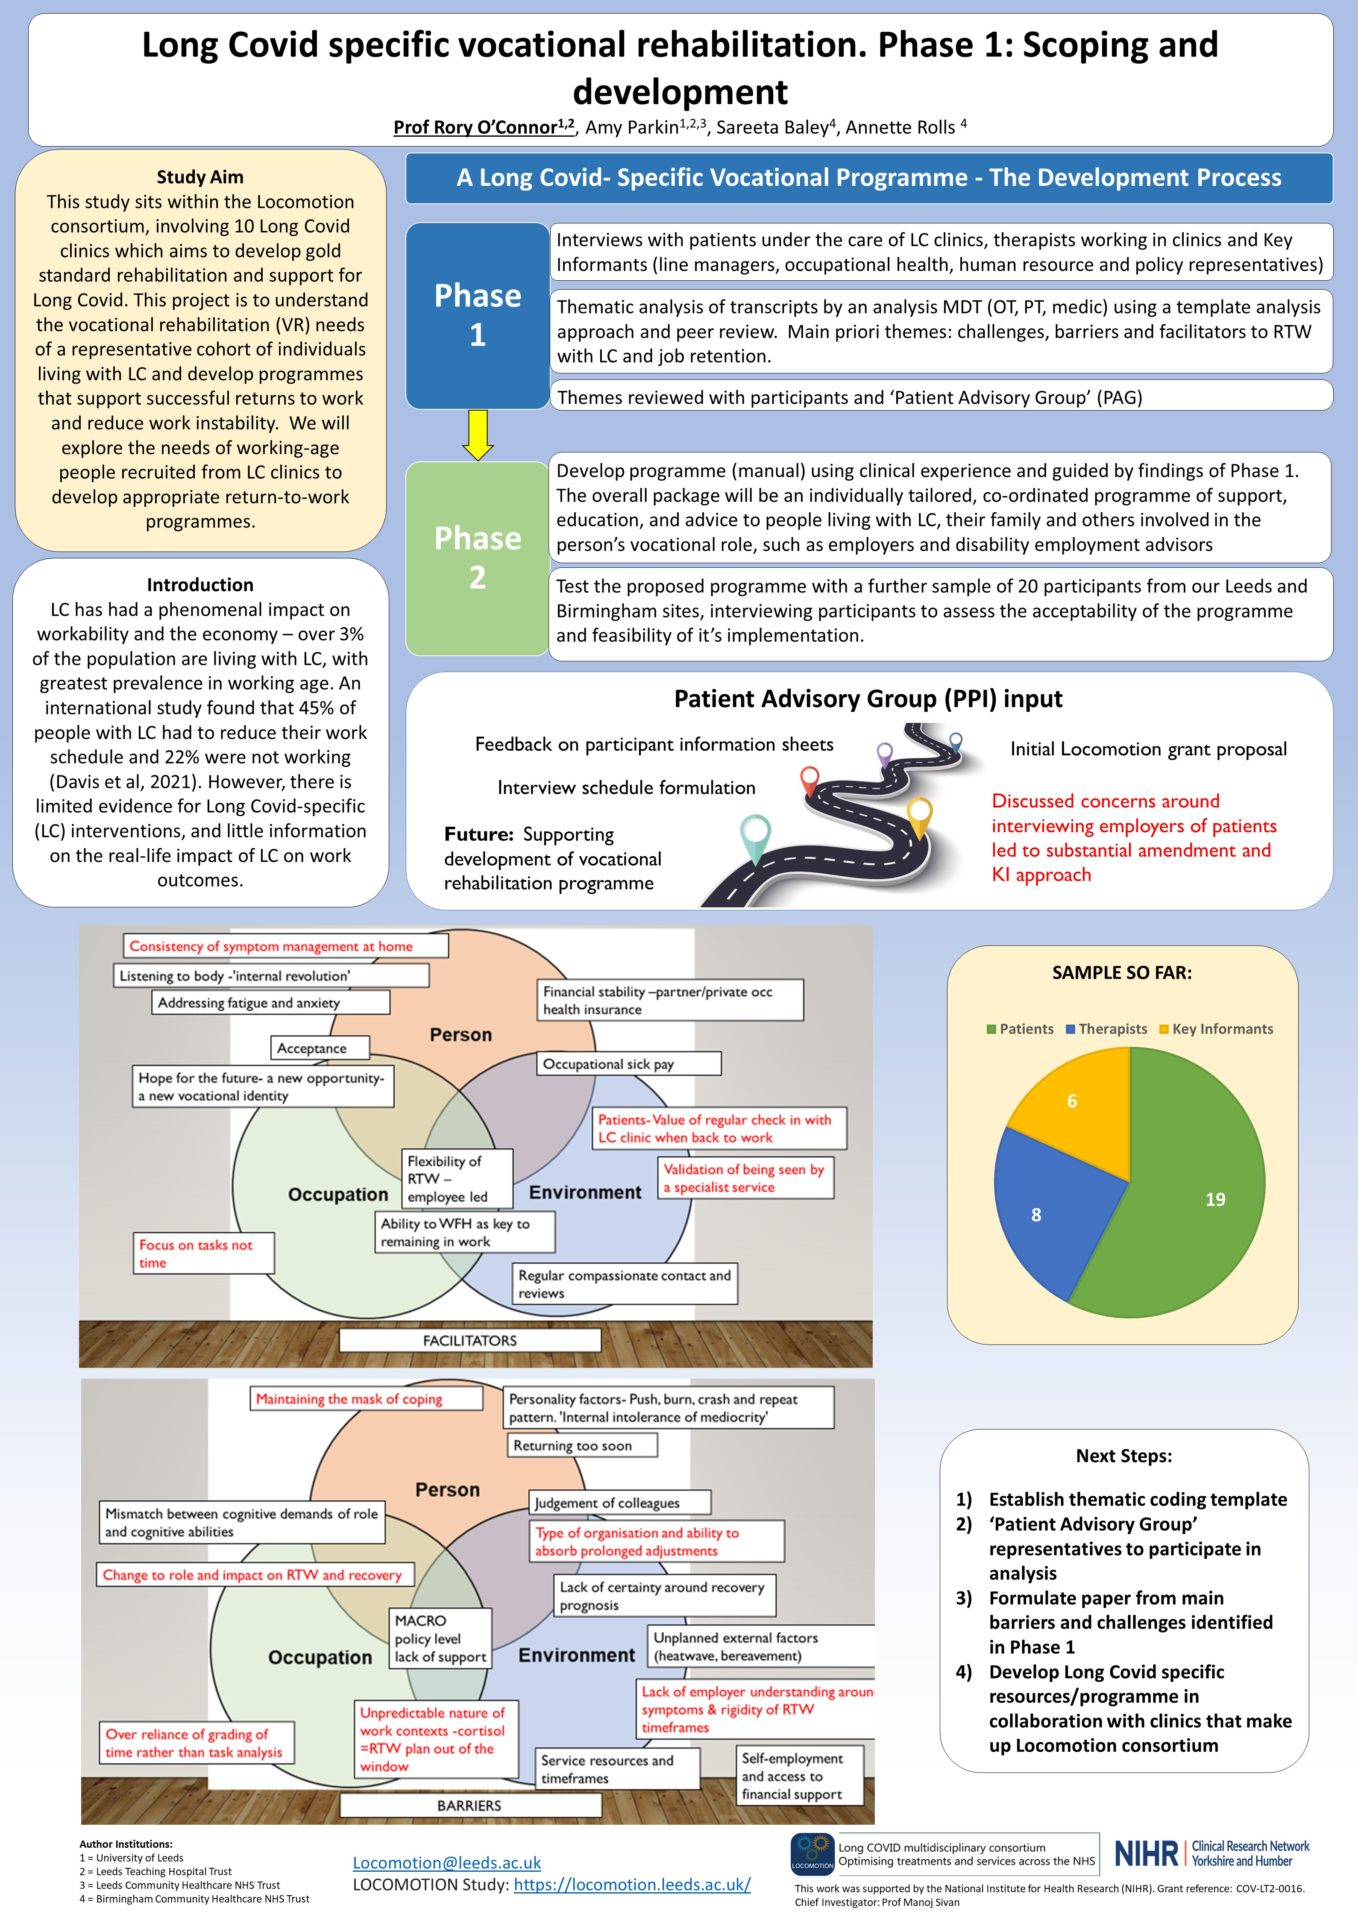 Long COVID Specific vocational rehabilitation. Phase 1: Scoping and Development Poster